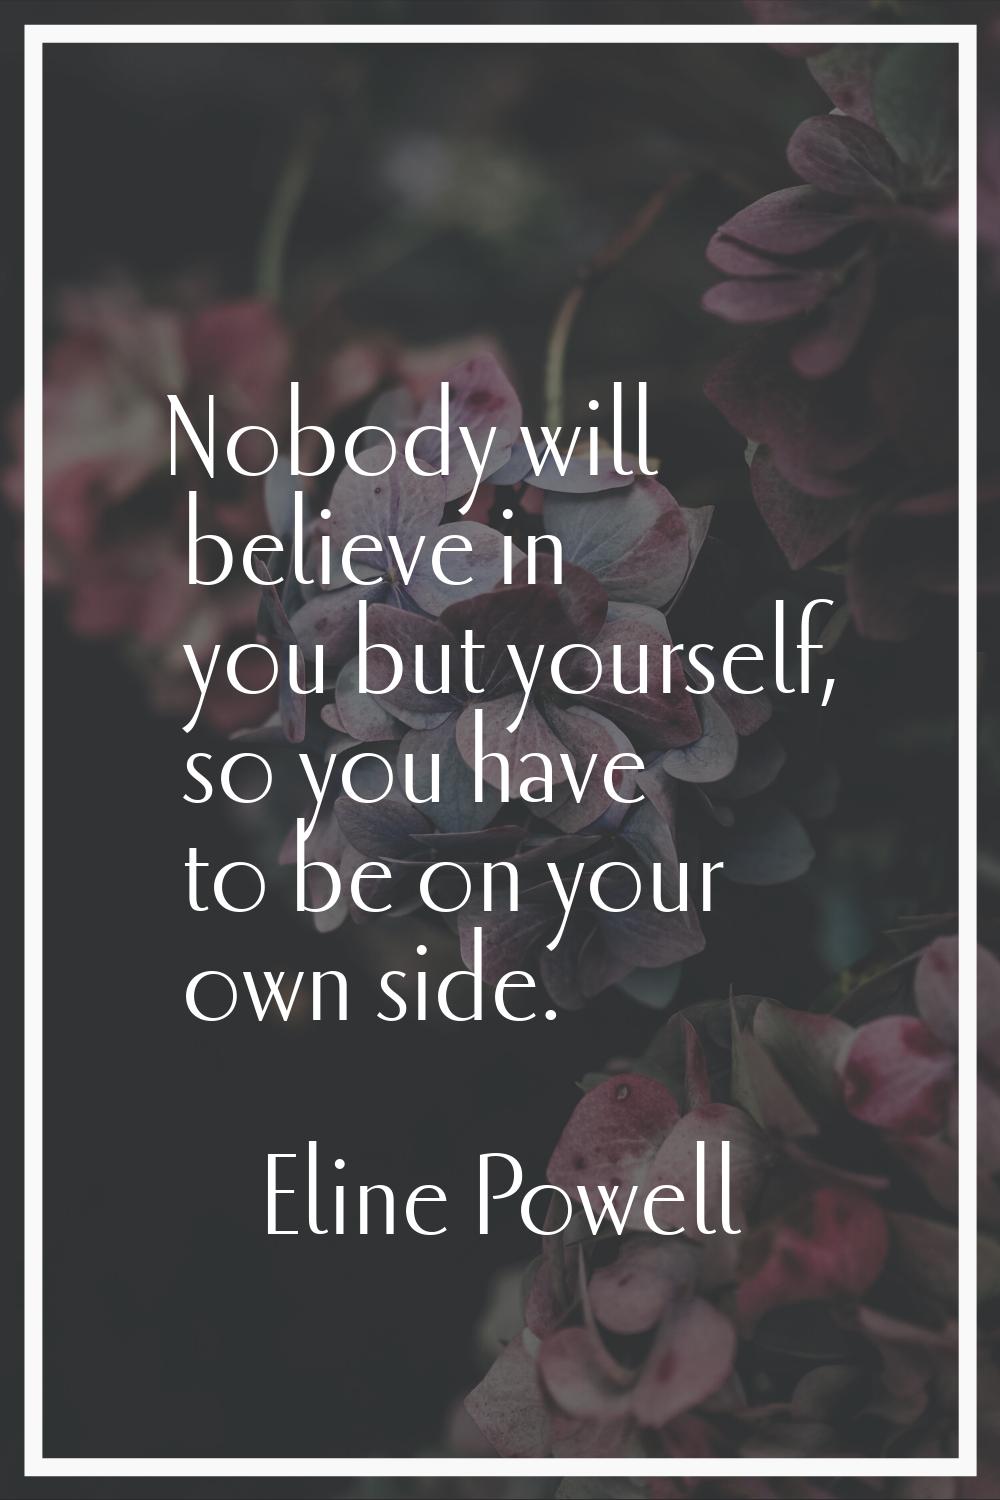 Nobody will believe in you but yourself, so you have to be on your own side.